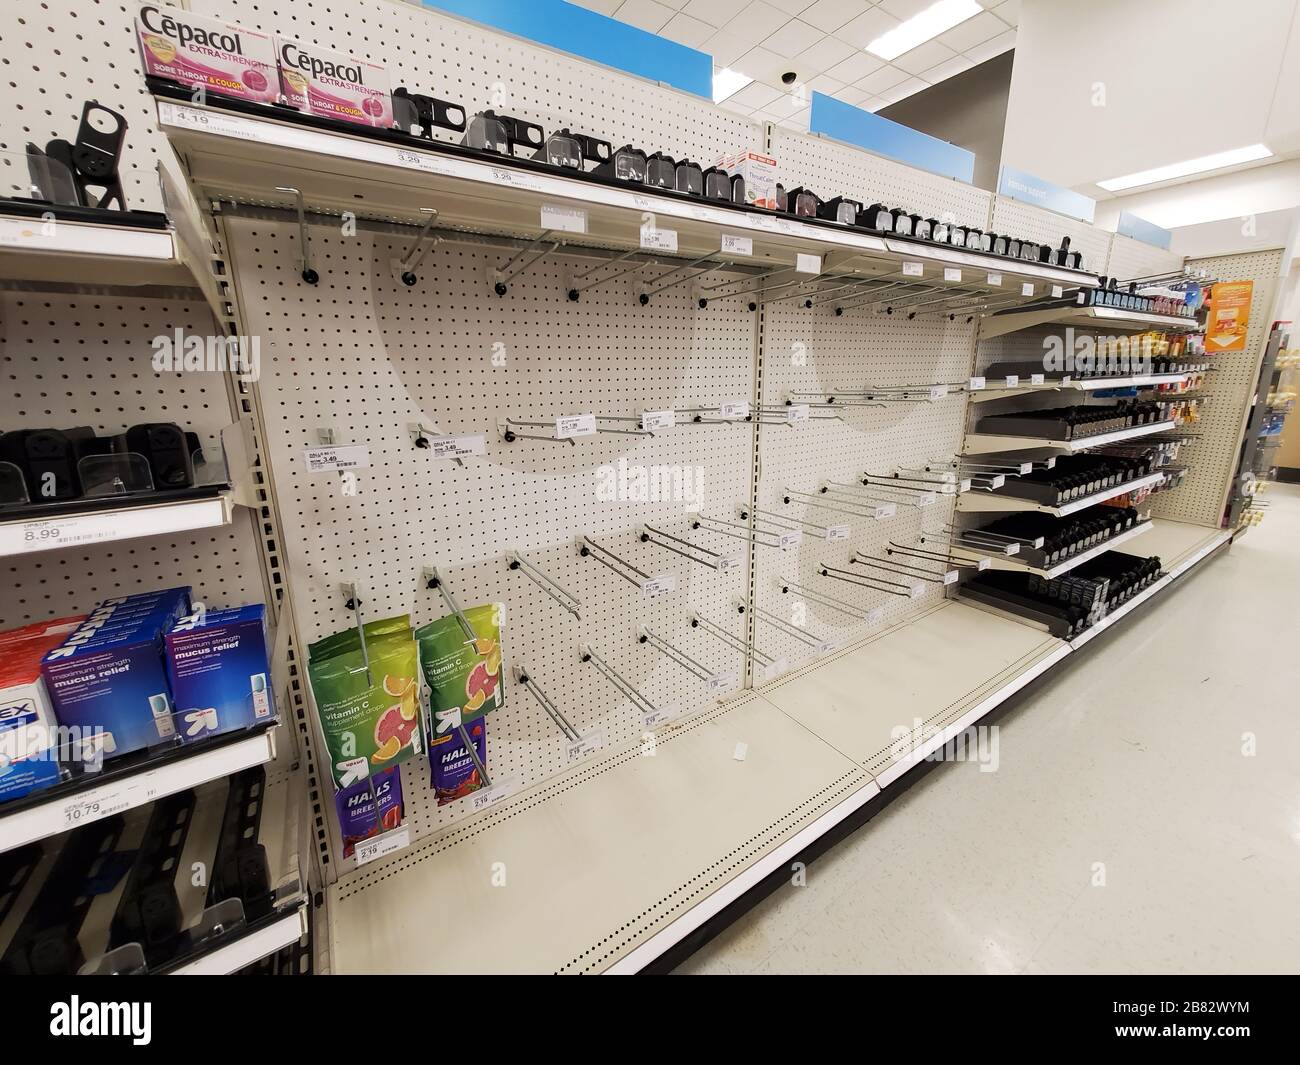 During an outbreak of the COVID-19 coronavirus, customers purchased all available toilet paper, paper towels, medical supplies, hand sanitizer and other essential items, leaving empty shelves at a Target retail store in Contra Costa County, San Ramon, California, a region where the virus was confirmed to be actively spreading, March 12, 2020. () Stock Photo